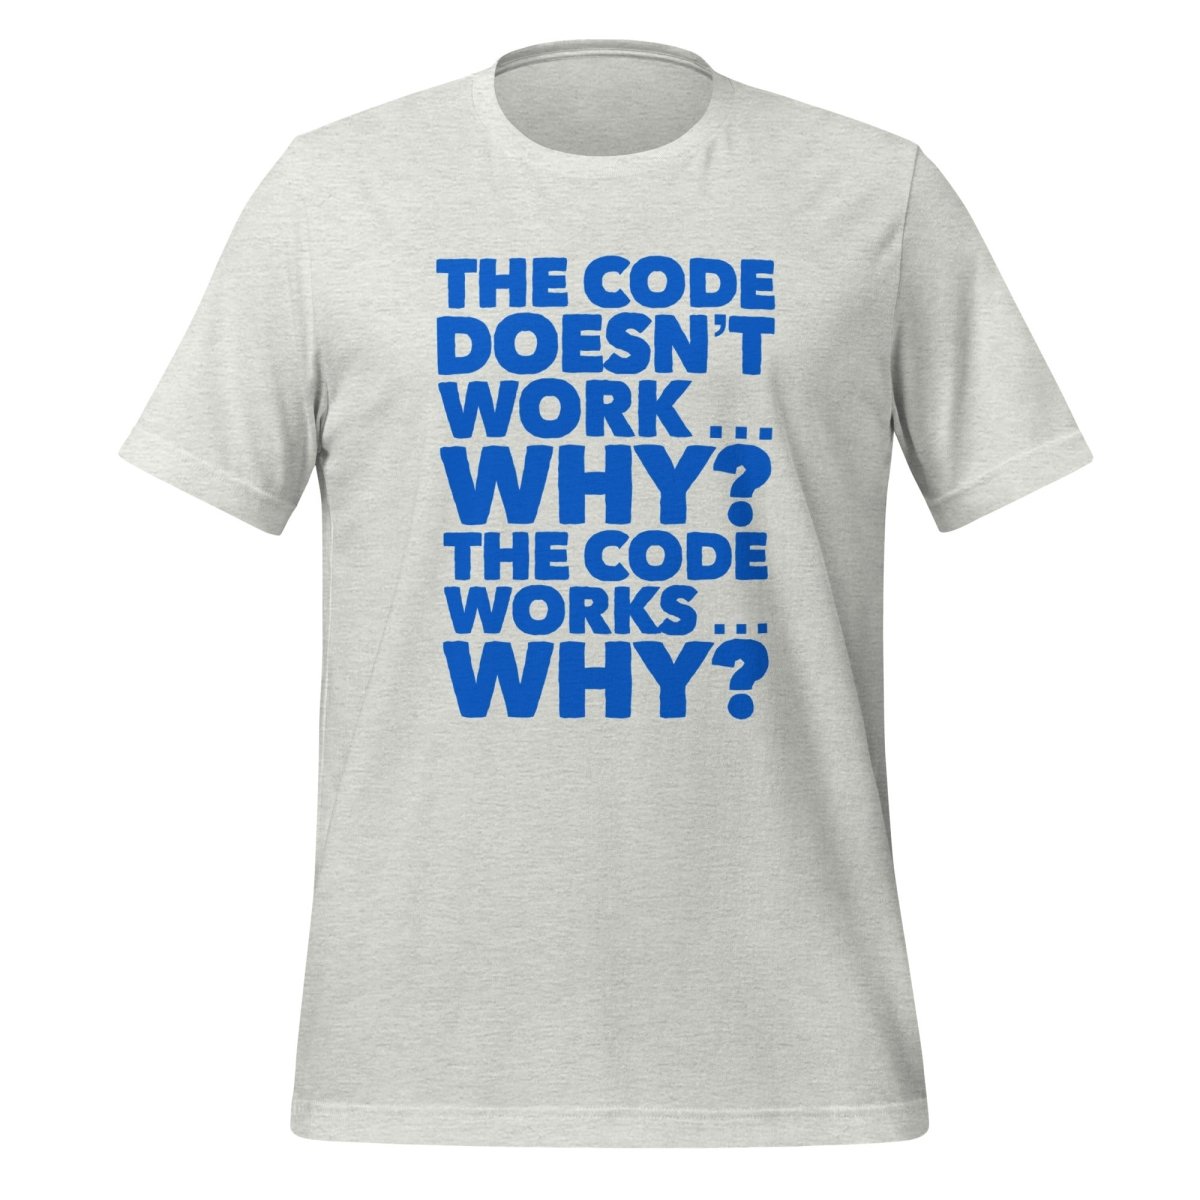 The code doesn't work, why? T - Shirt 2 (unisex) - Ash - AI Store